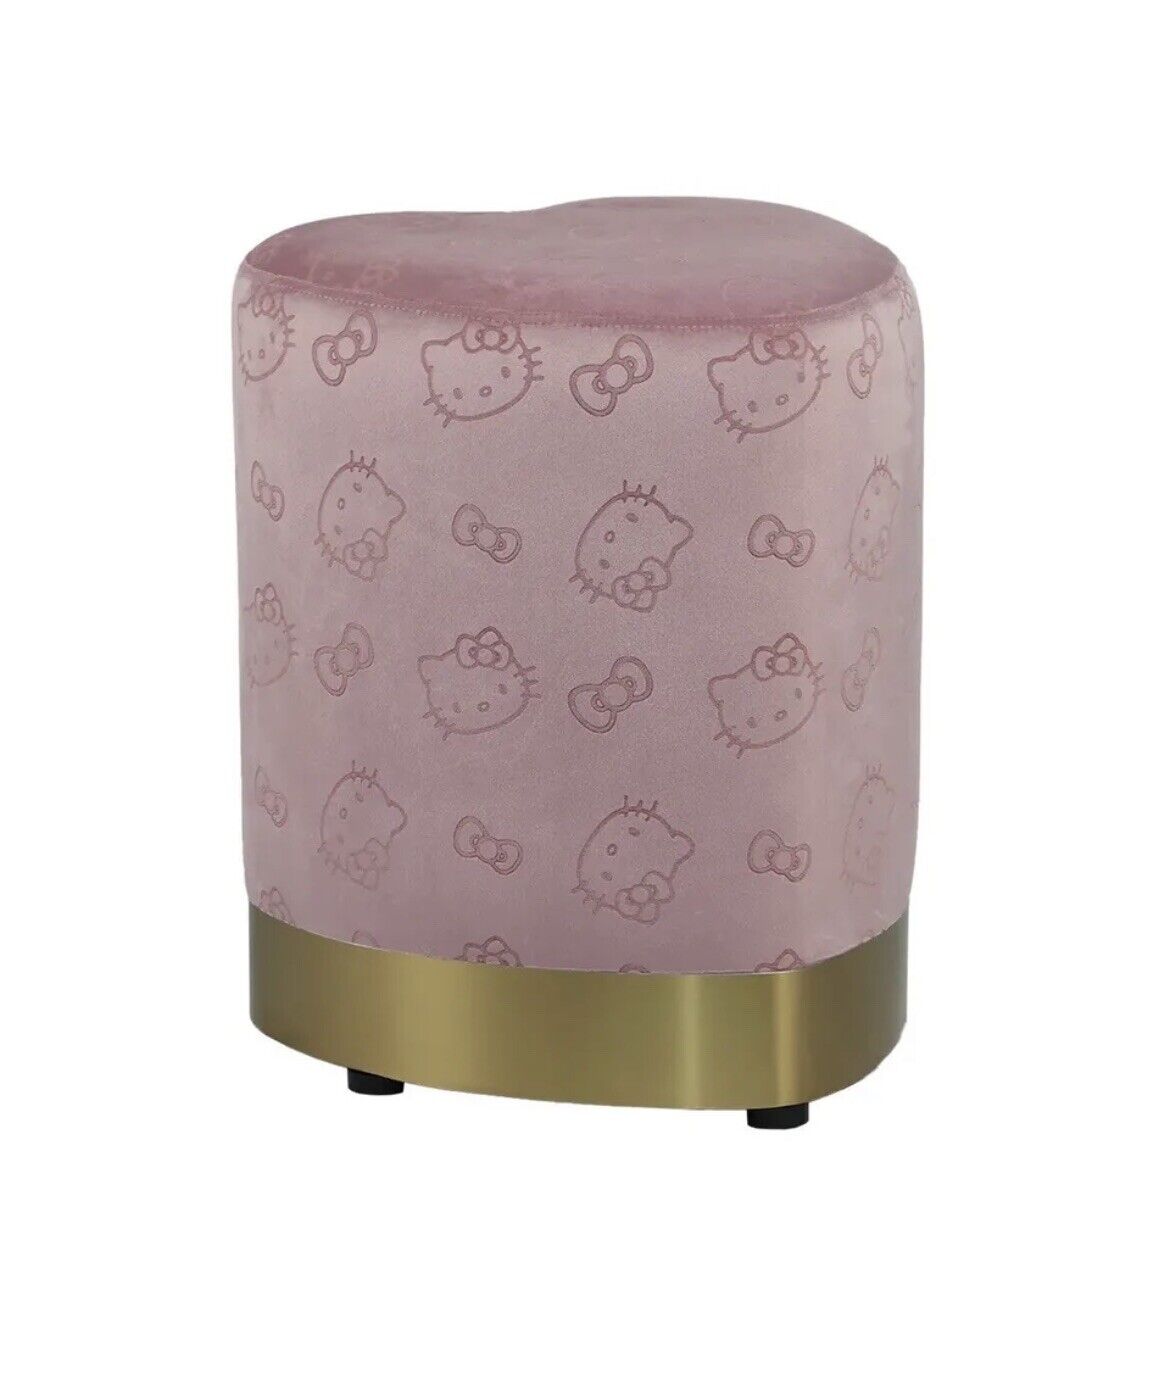 HELLO KITTY Pink Heart Vanity Ottoman Stool Makeup Chair  Plush Gold Accent NWT